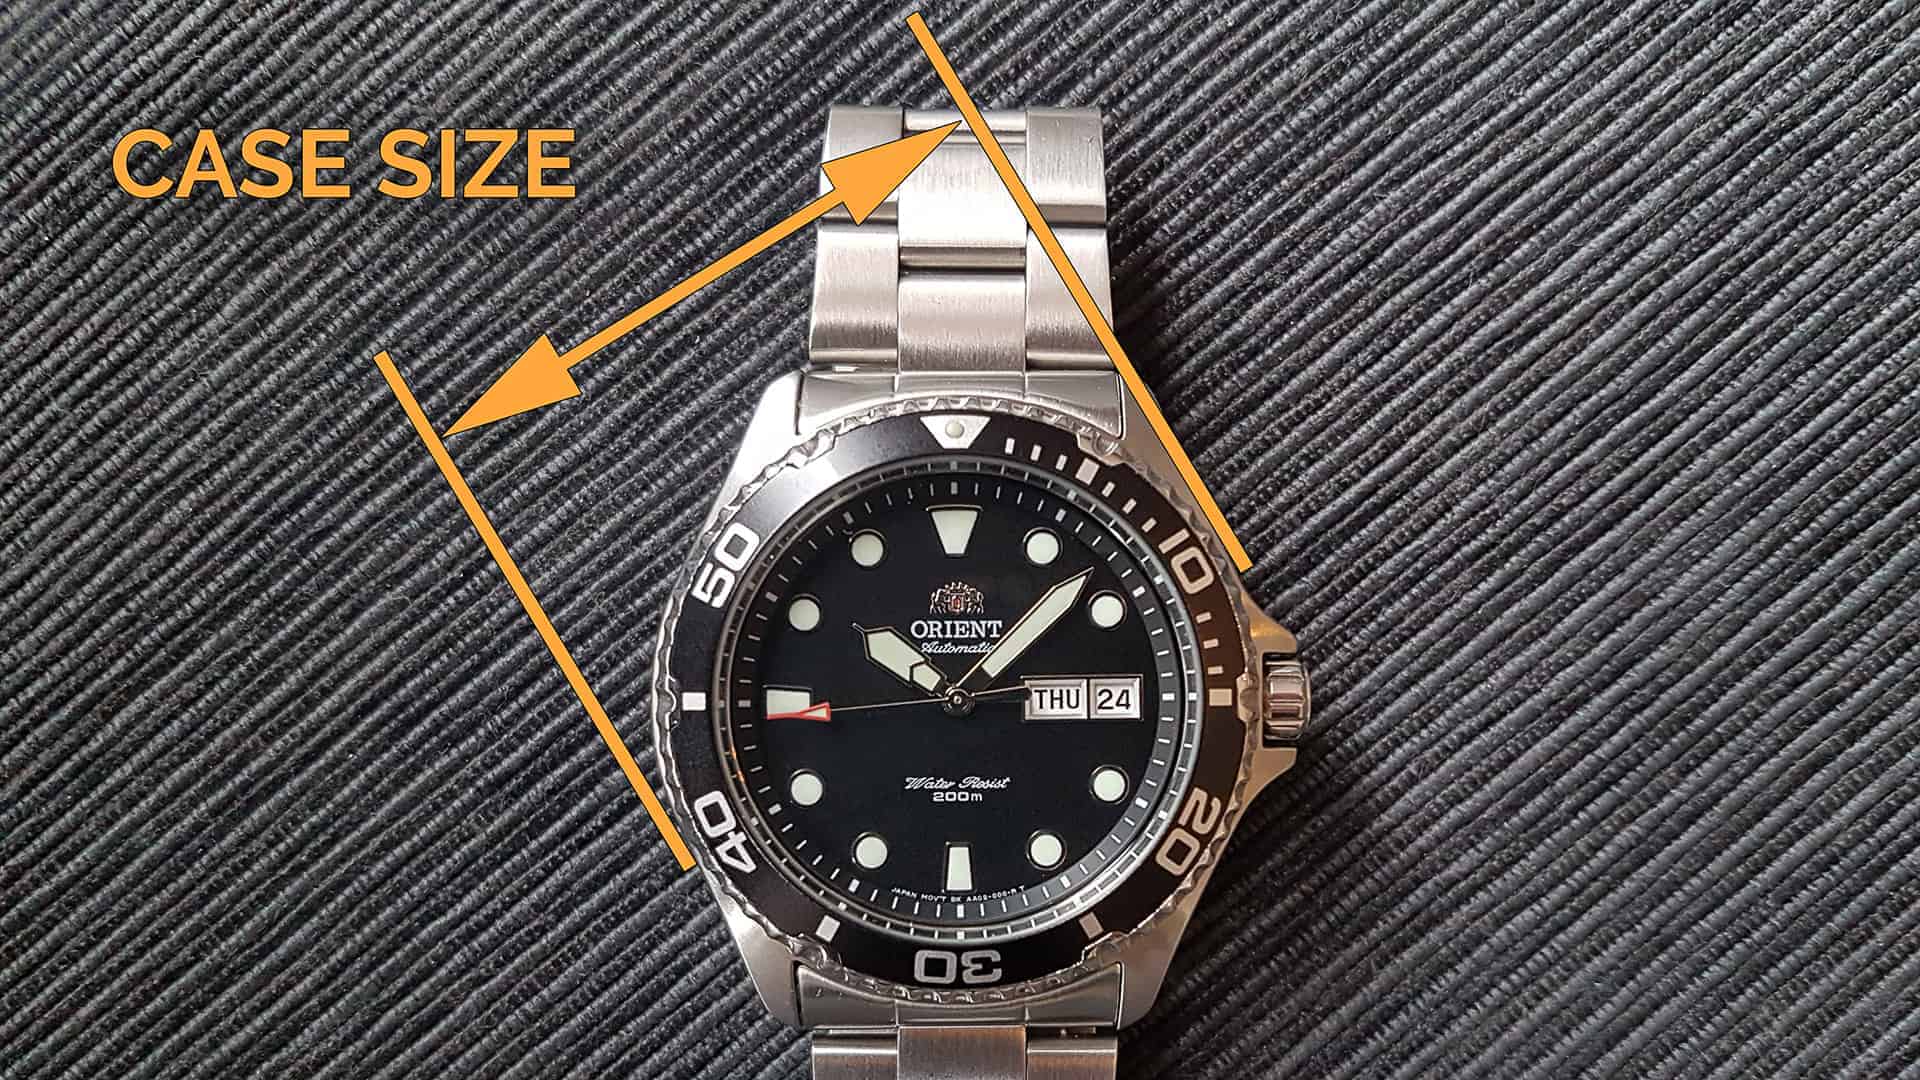 The Ultimate Watch Size Guide + Watch Size Calculator (2023)